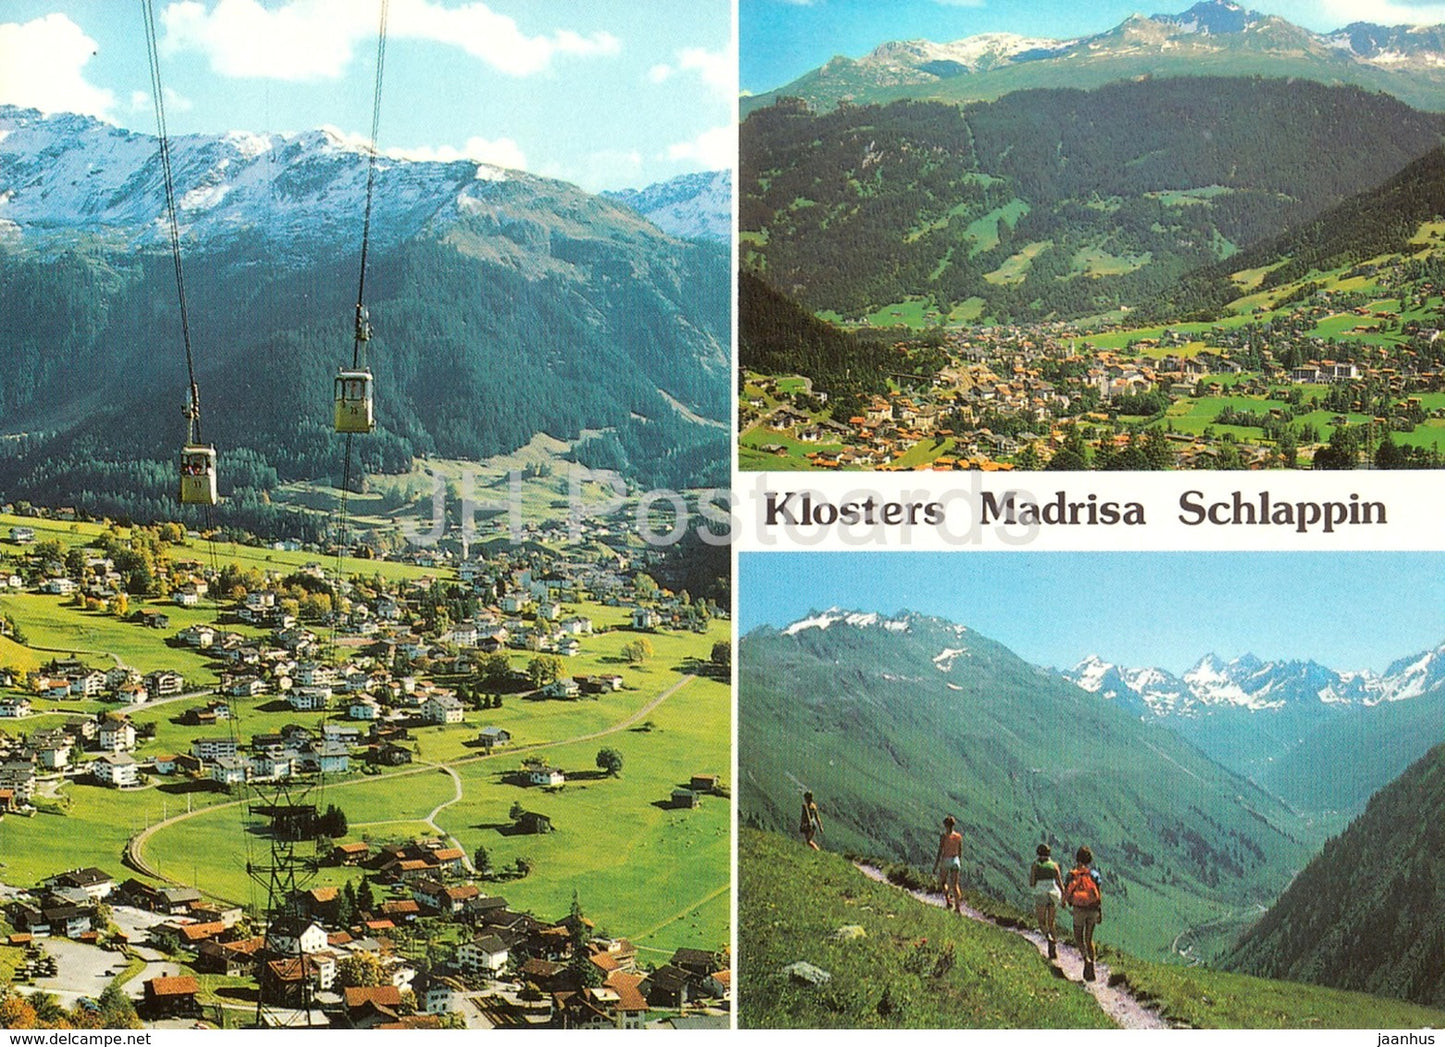 Klosters - Madrisa - Schlappin - cable car - multiview - 439 - Switzerland - unused - JH Postcards